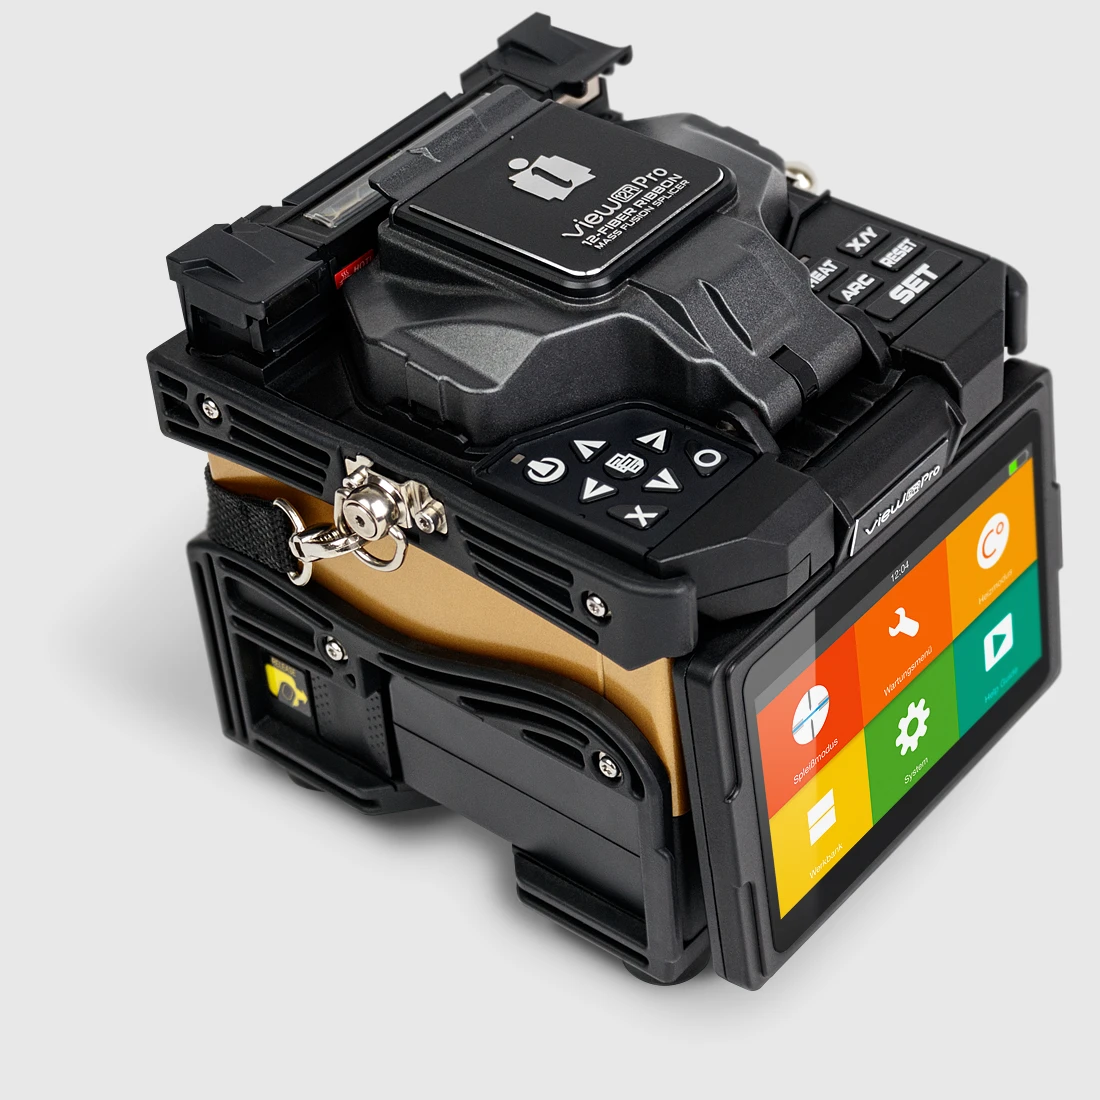 View 12R Pro splicer: Perspective view